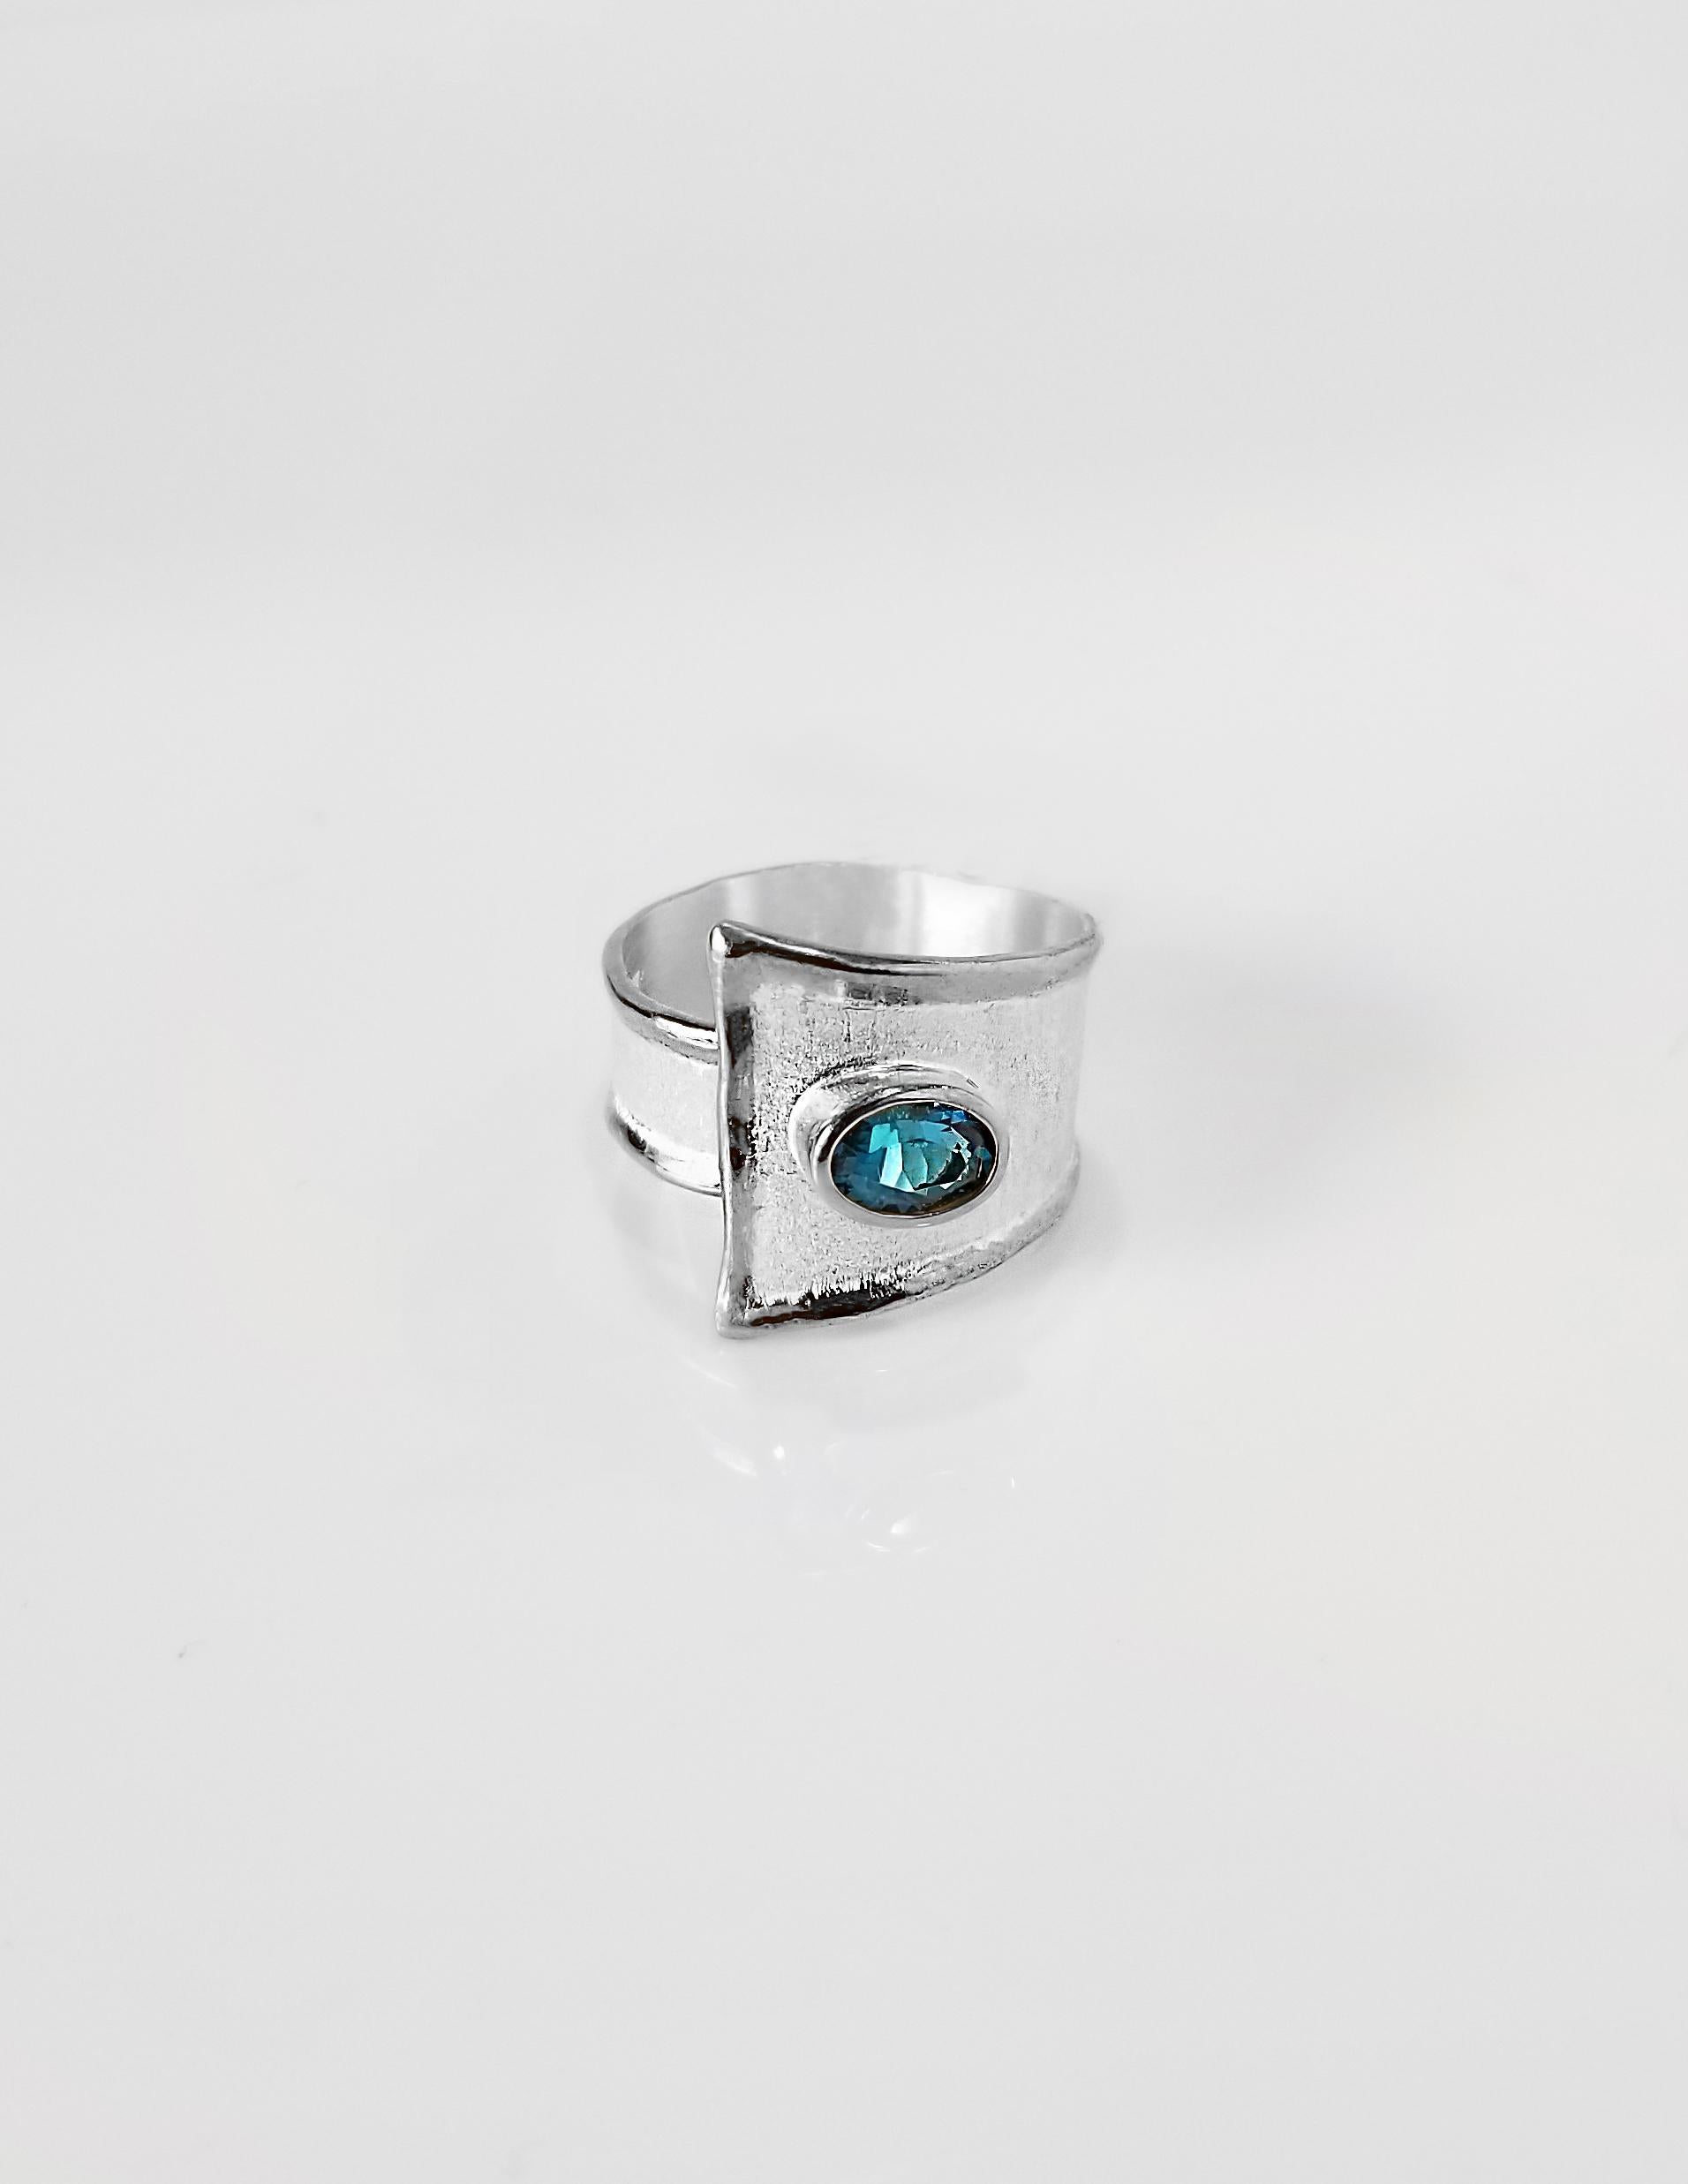 Yianni designer Fine Silver 100% Handmade Artisan Adjustable Band Ring is made for the Ammos Collection and features a 1.60 Carat London Blue Topaz. The gorgeous and designer band ring is complemented by a unique technique of craftsmanship - brushed